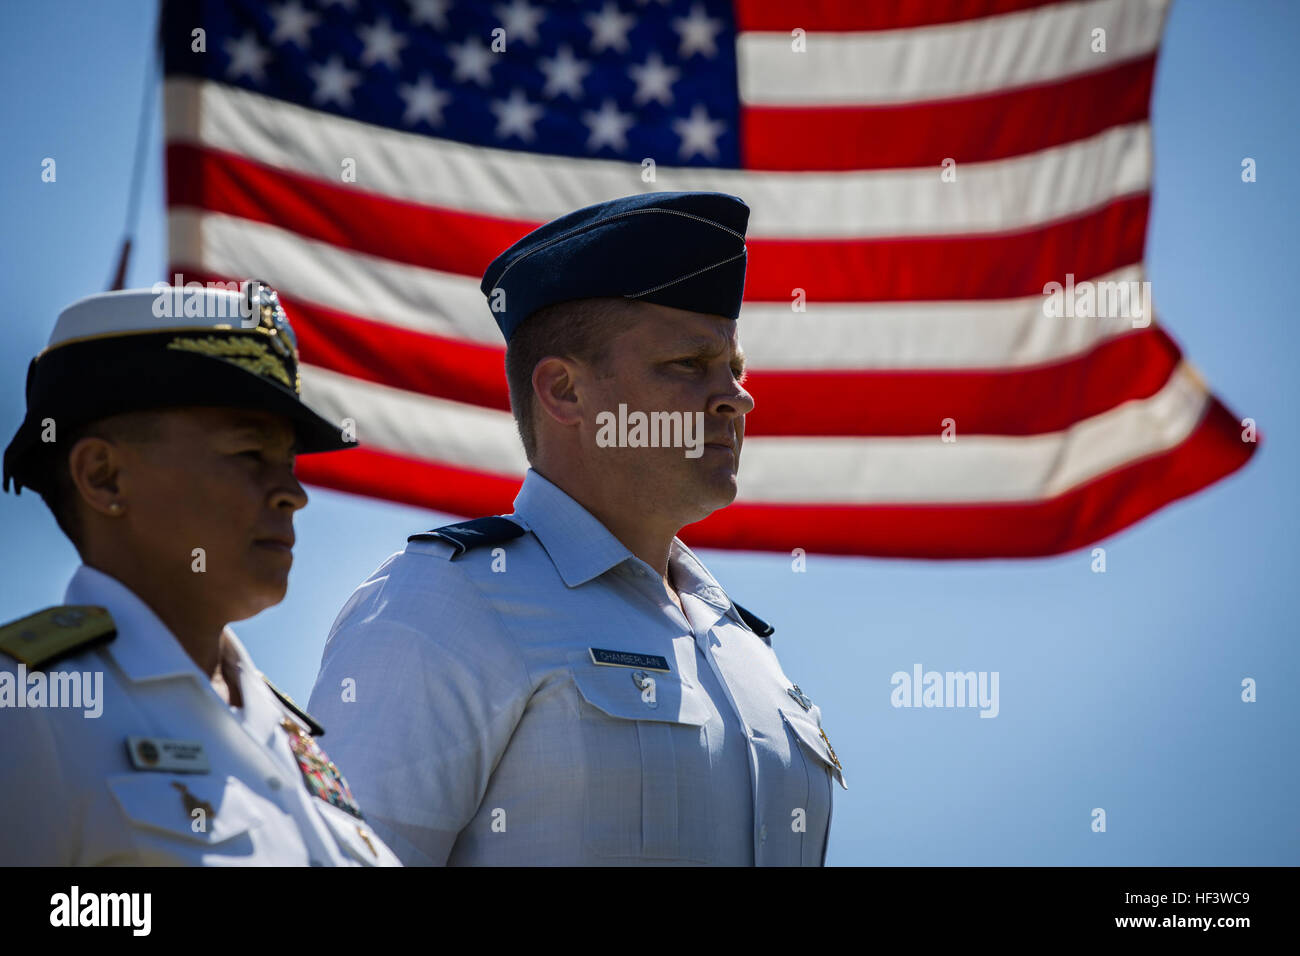 U.S. Navy Rear Adm. Babette Bolivar, left, Commander, Naval Forces Marianas, Guam, and U.S. Air Force Col. Tyrell Chamberlain, vice commander, 36th Wing, participate in the 71st Commemoration of the Battle of Iwo Jima at Iwo To, Japan, March 19, 2016. The Iwo Jima Reunion of Honor is an opportunity for Japanese and U.S. veterans and their families, dignitaries, leaders and service members from both nations to honor the battle while recognizing 71 years of peace and prosperity in the U.S. – Japanese alliance. (U.S. Marine Corps photo by MCIPAC Combat Camera Lance Cpl. Juan Esqueda / Released) I Stock Photo